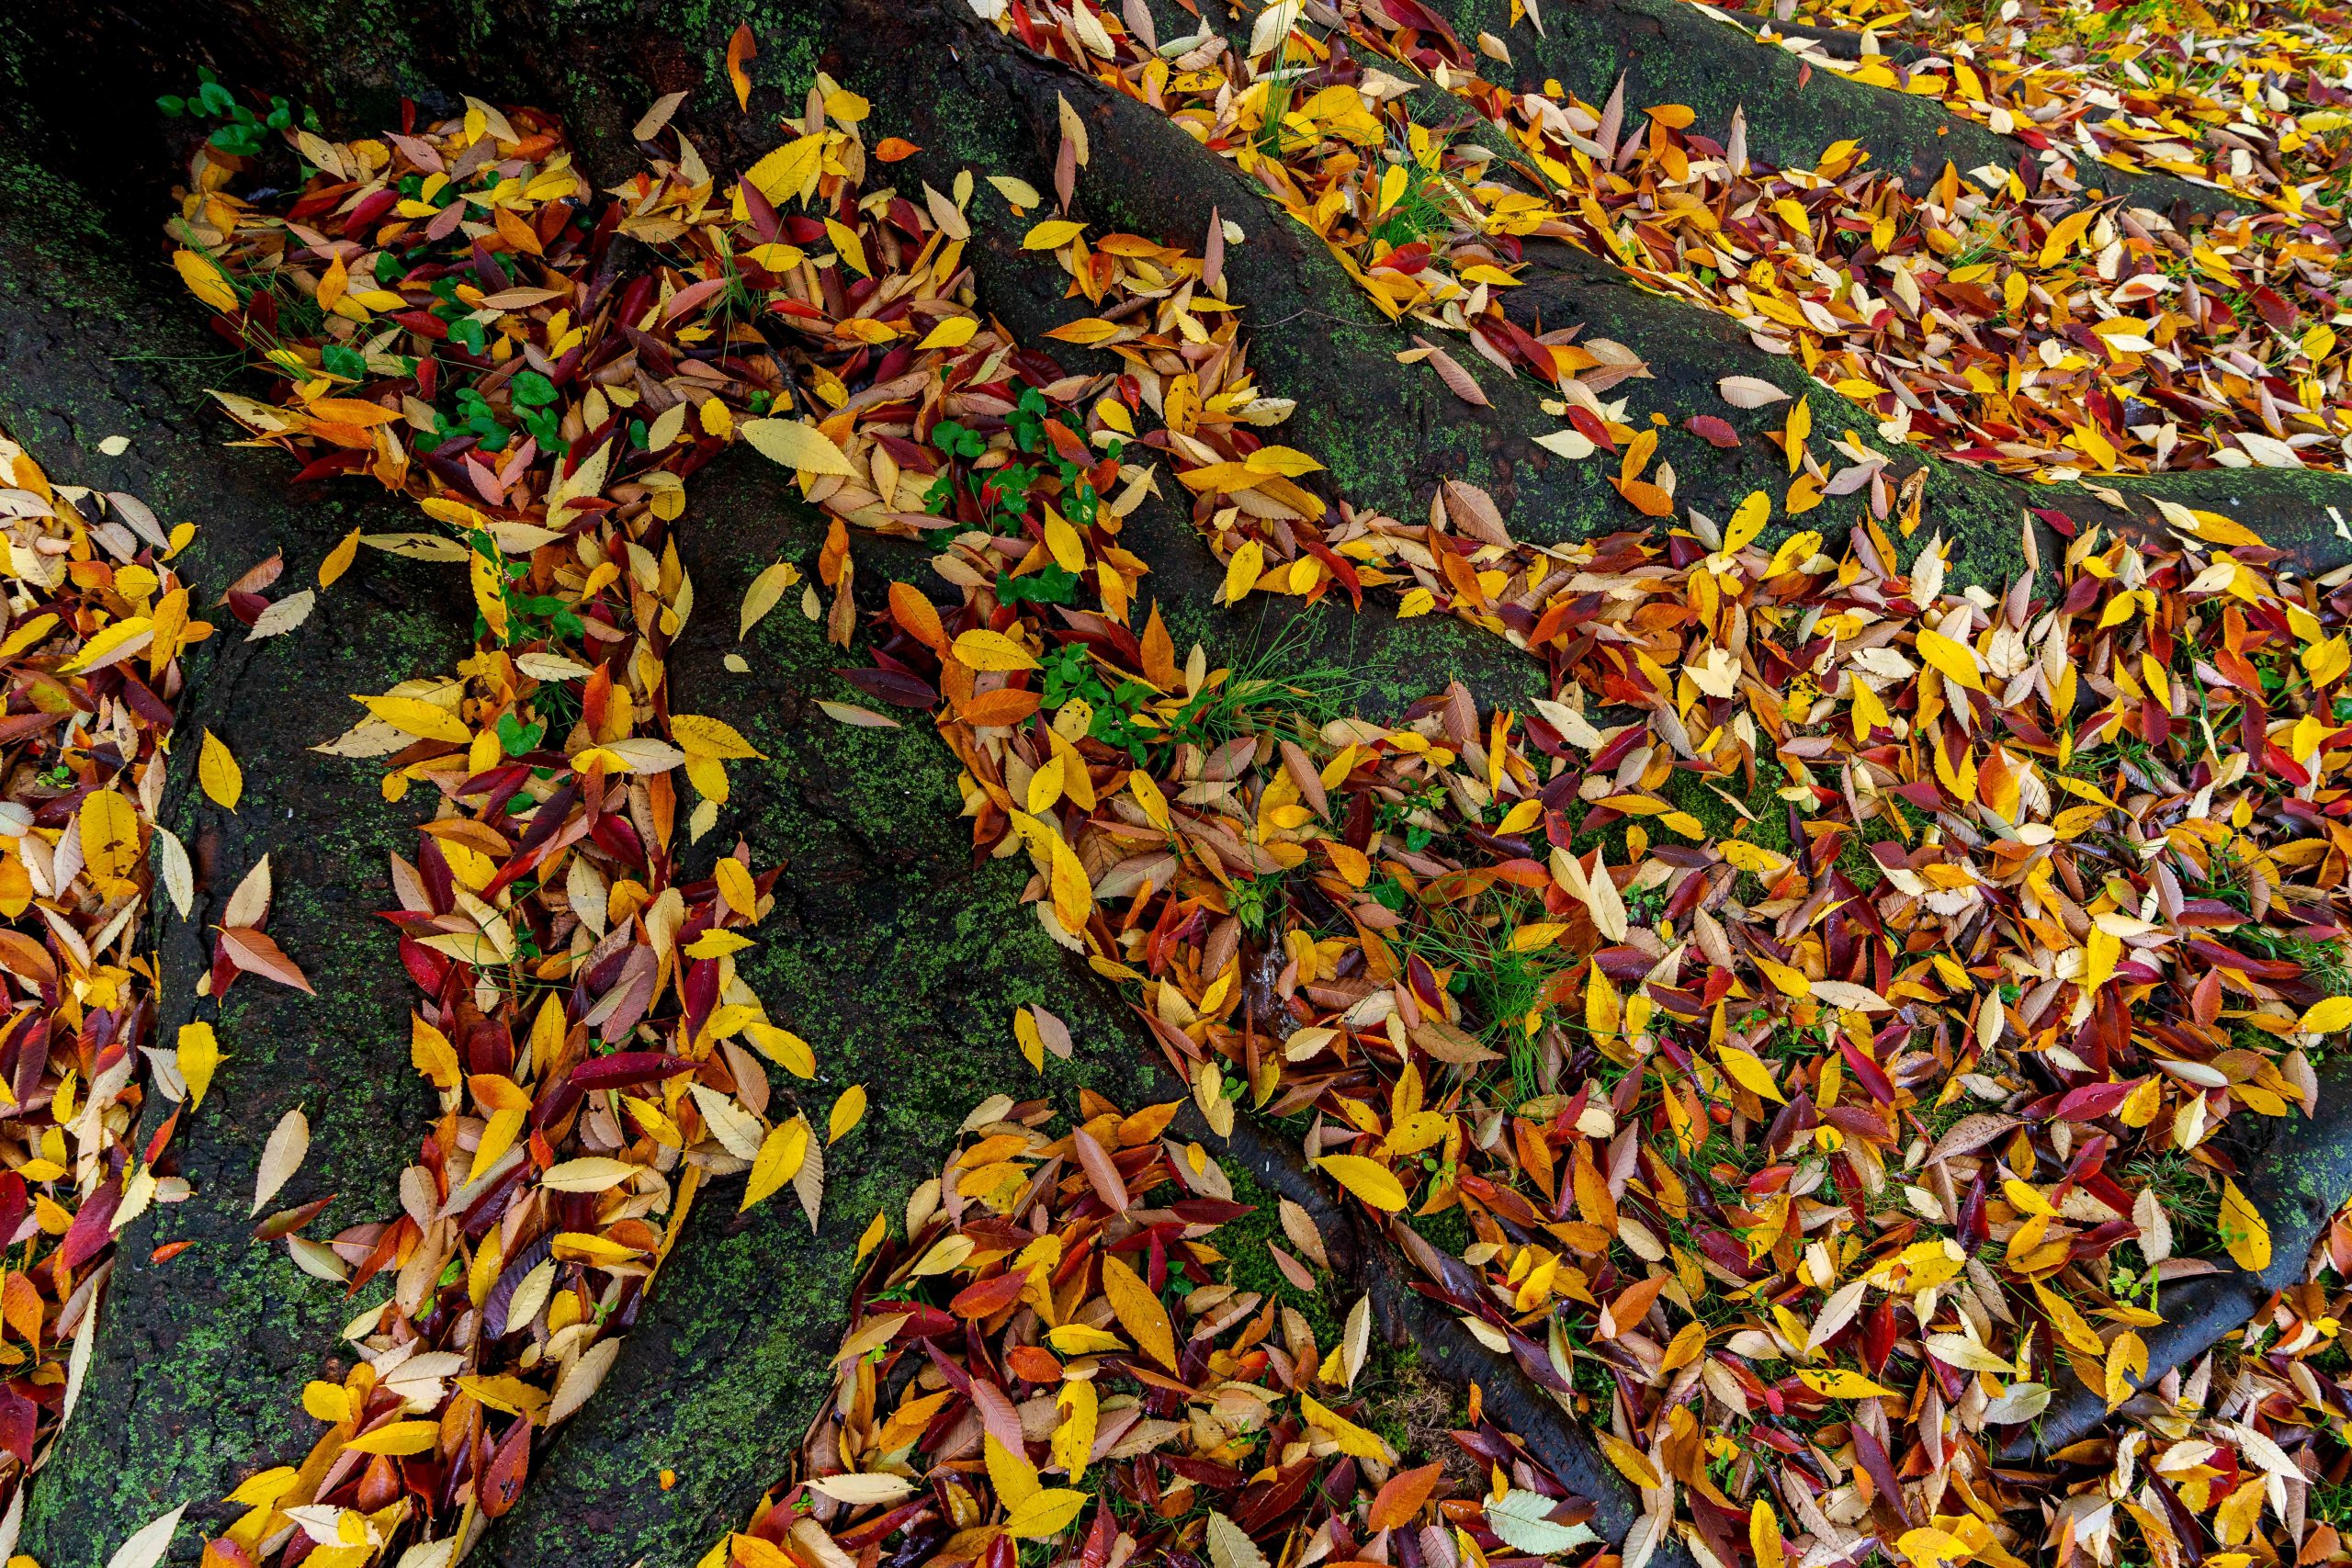 Fallen leaves in red and yellow cover a system of mossy roots